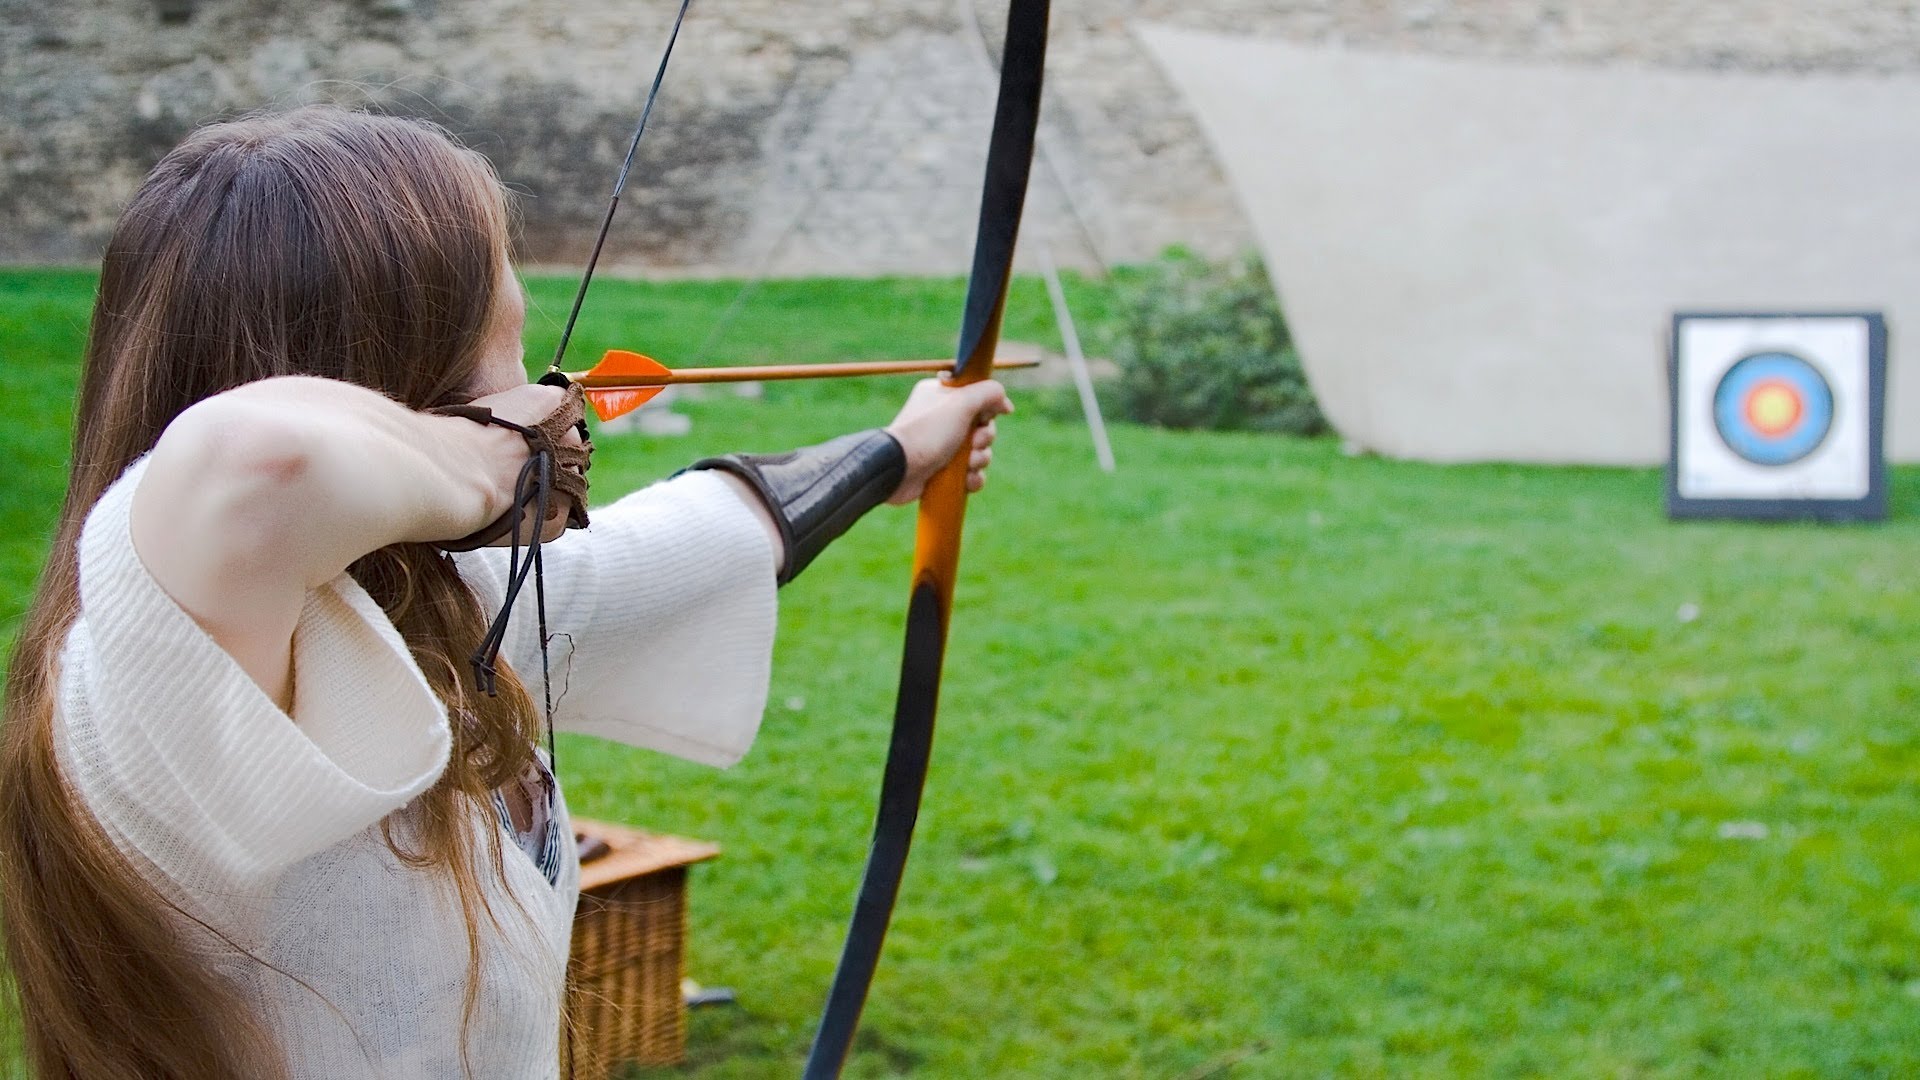 Archery Lessons-things to do in the summer